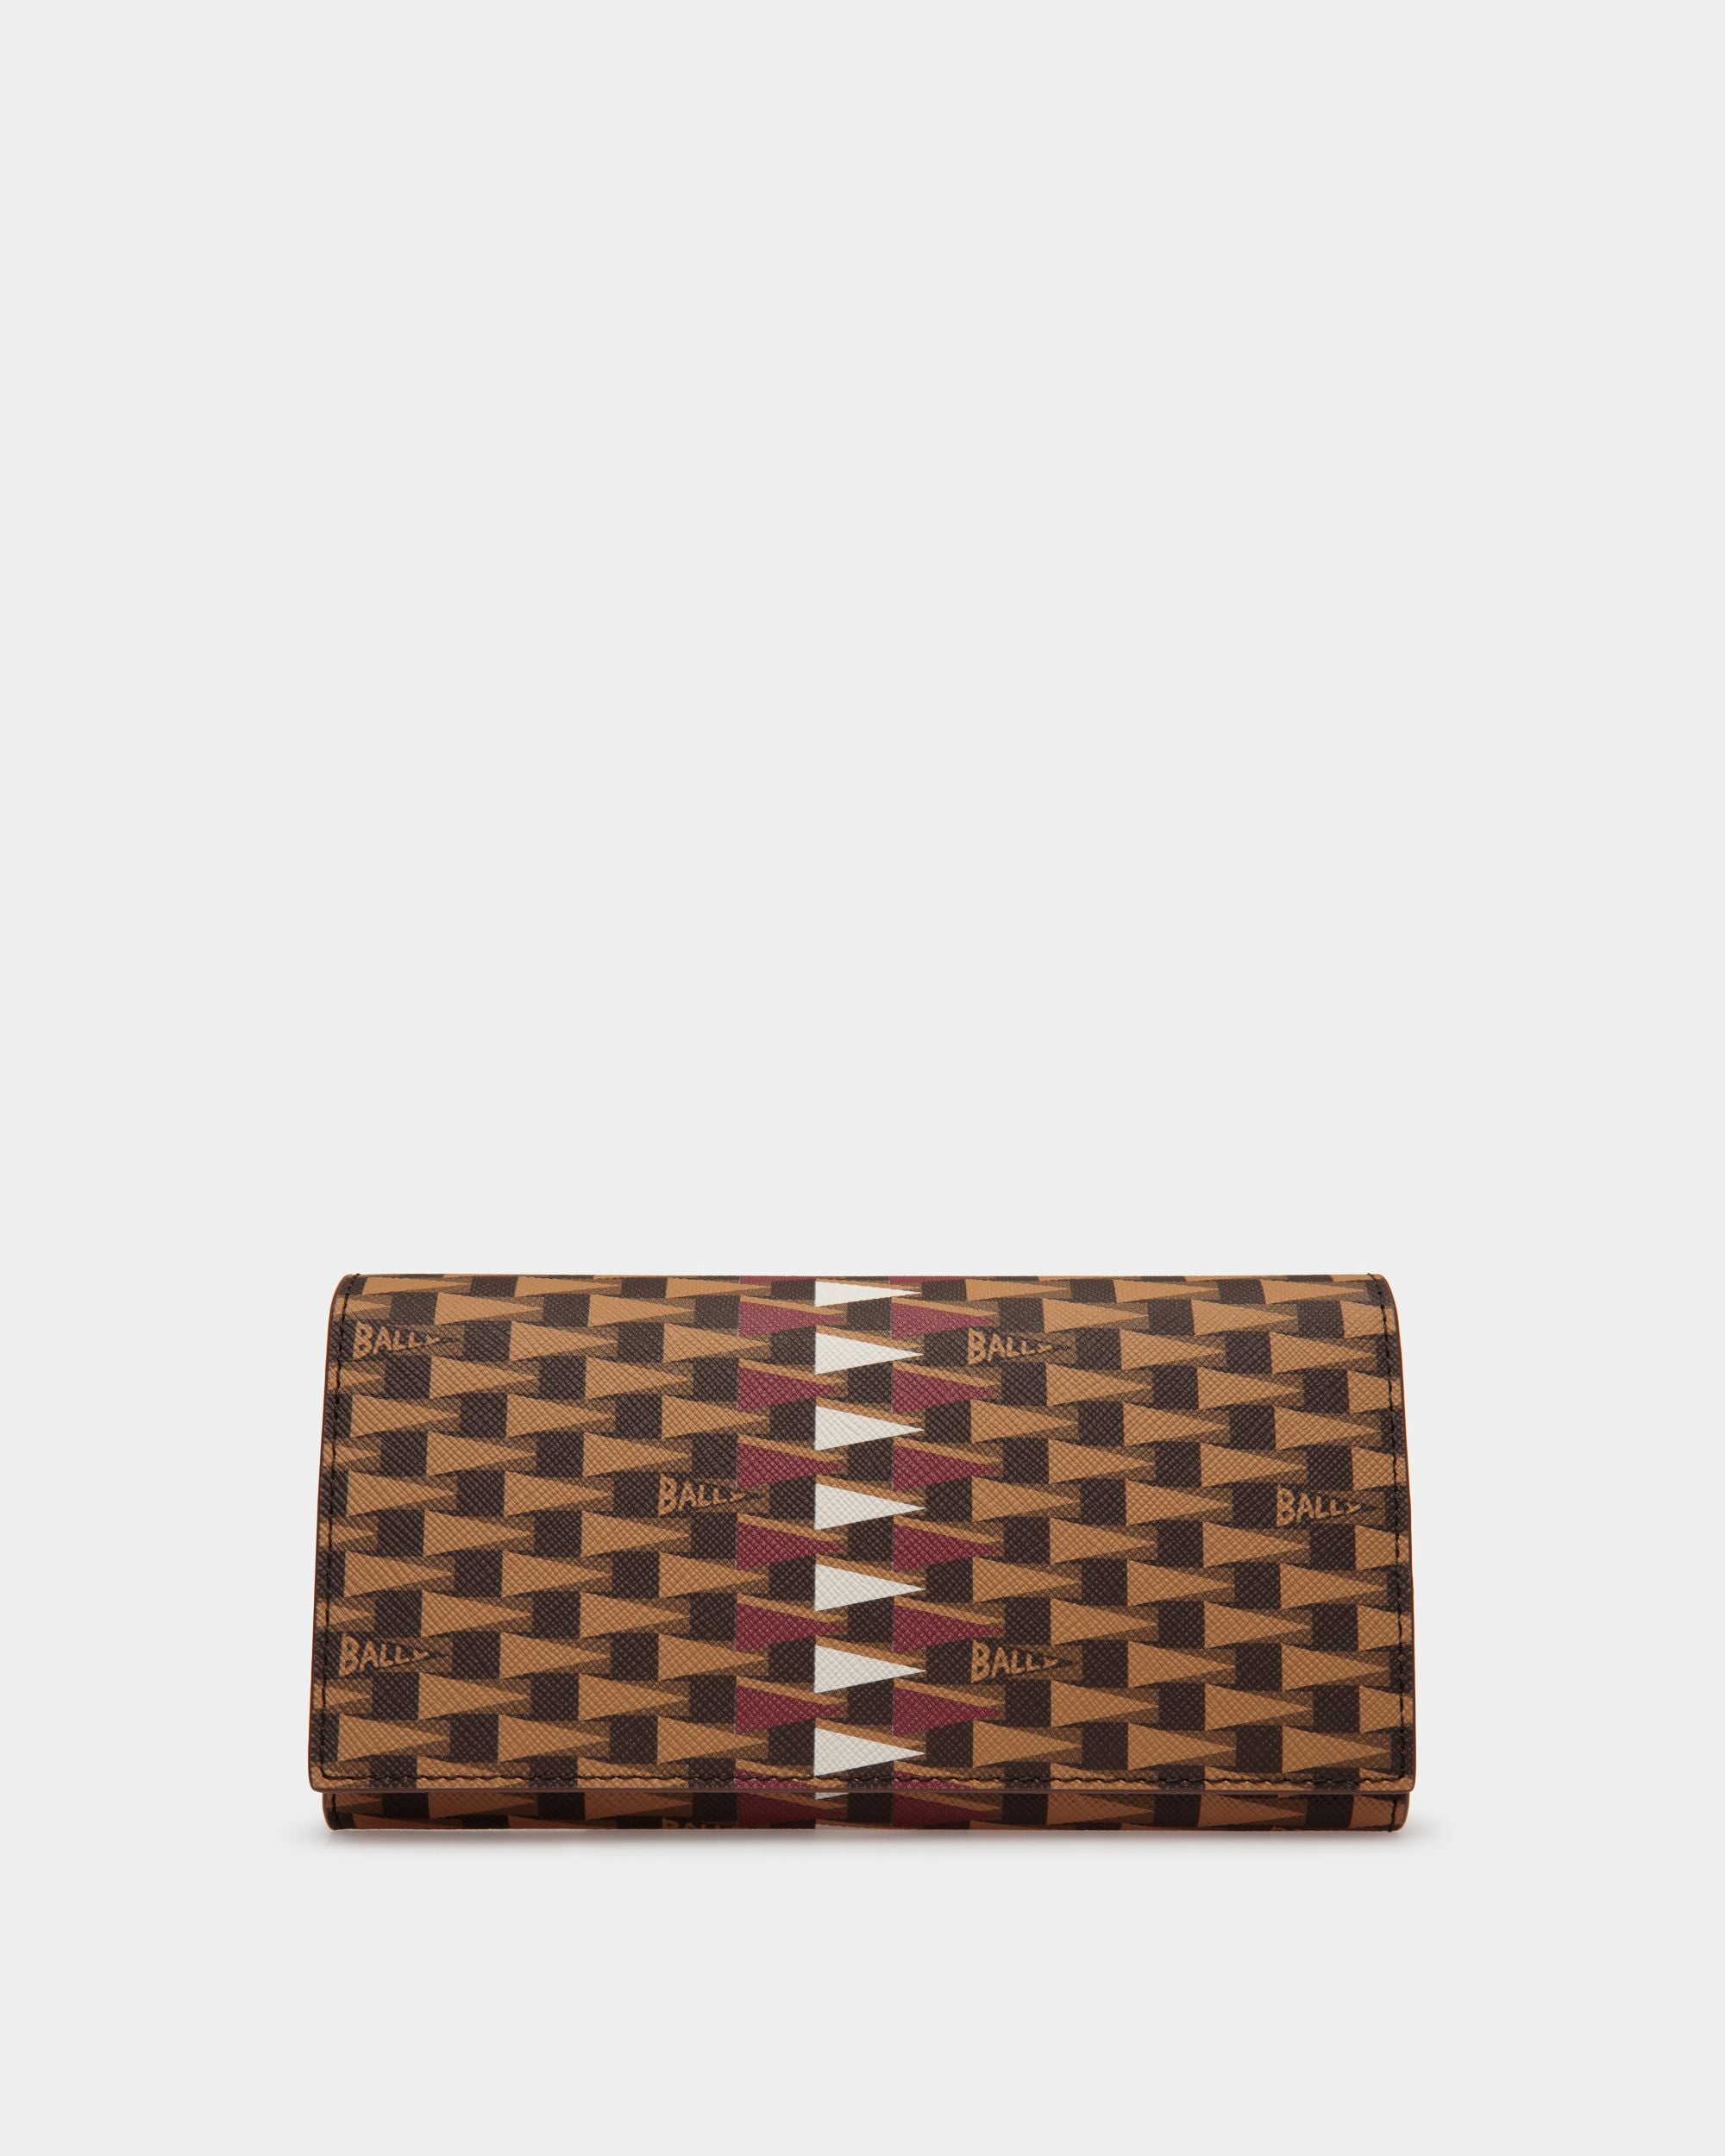 Pennant | Men's Continental Wallet in Brown Leather and TPU | Bally | Still Life Front